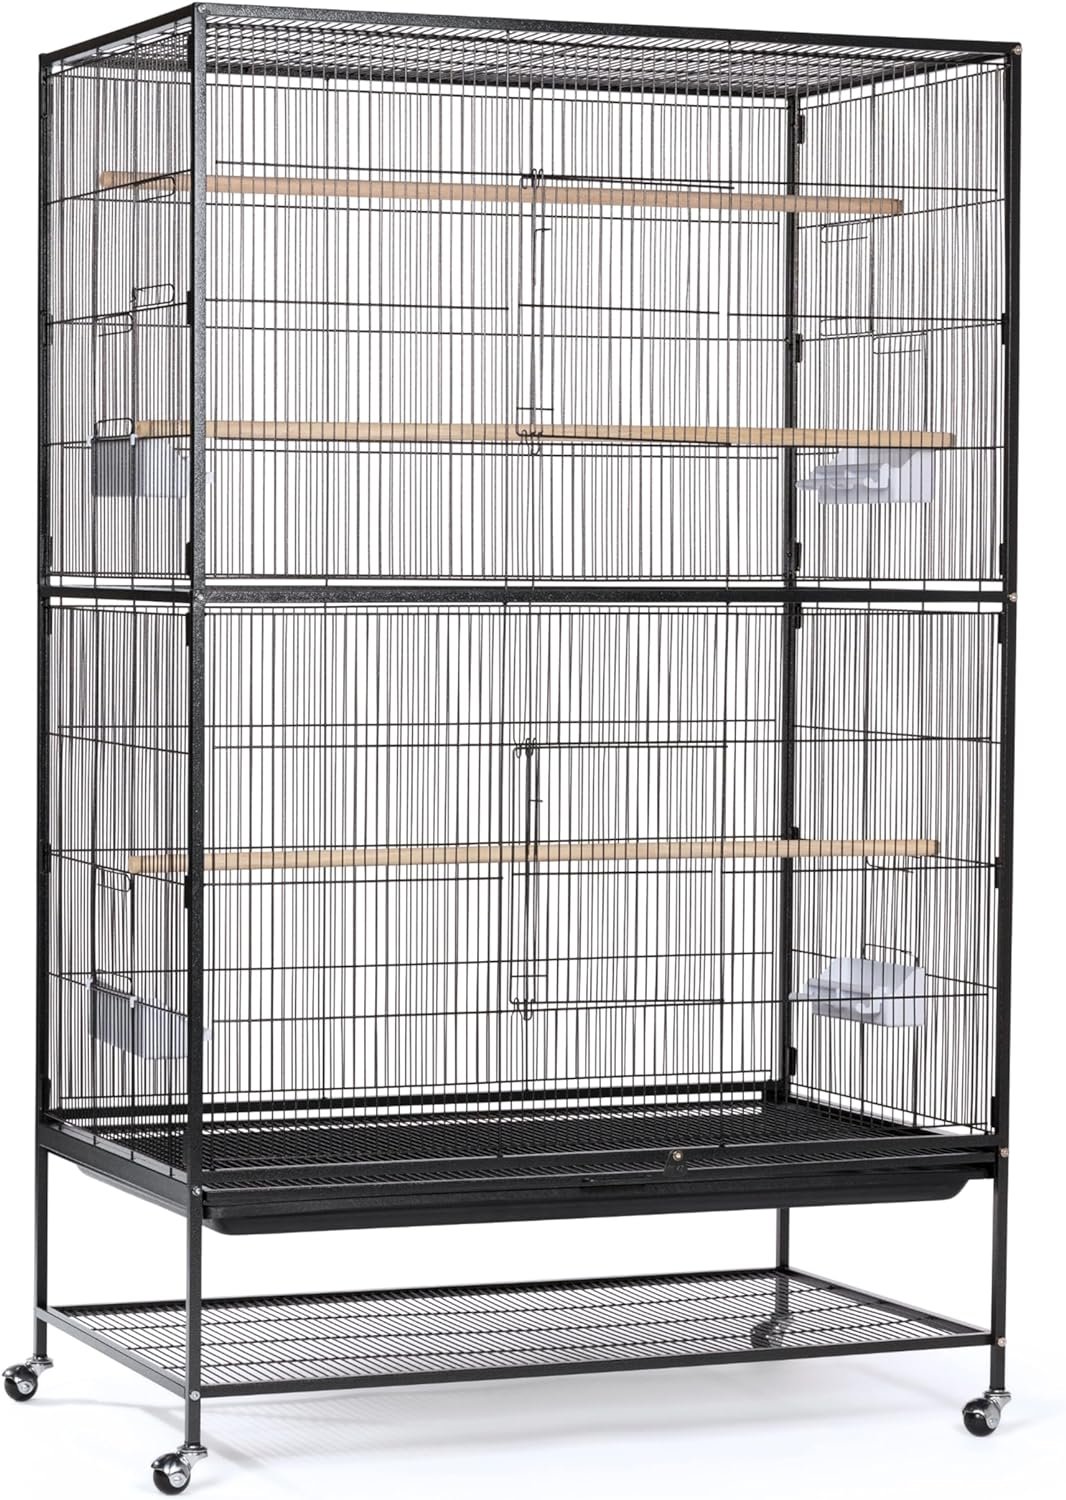 Prevue Hendryx F050 Pet Products Wrought Iron Flight Cage, X-Large, Hammertone Black